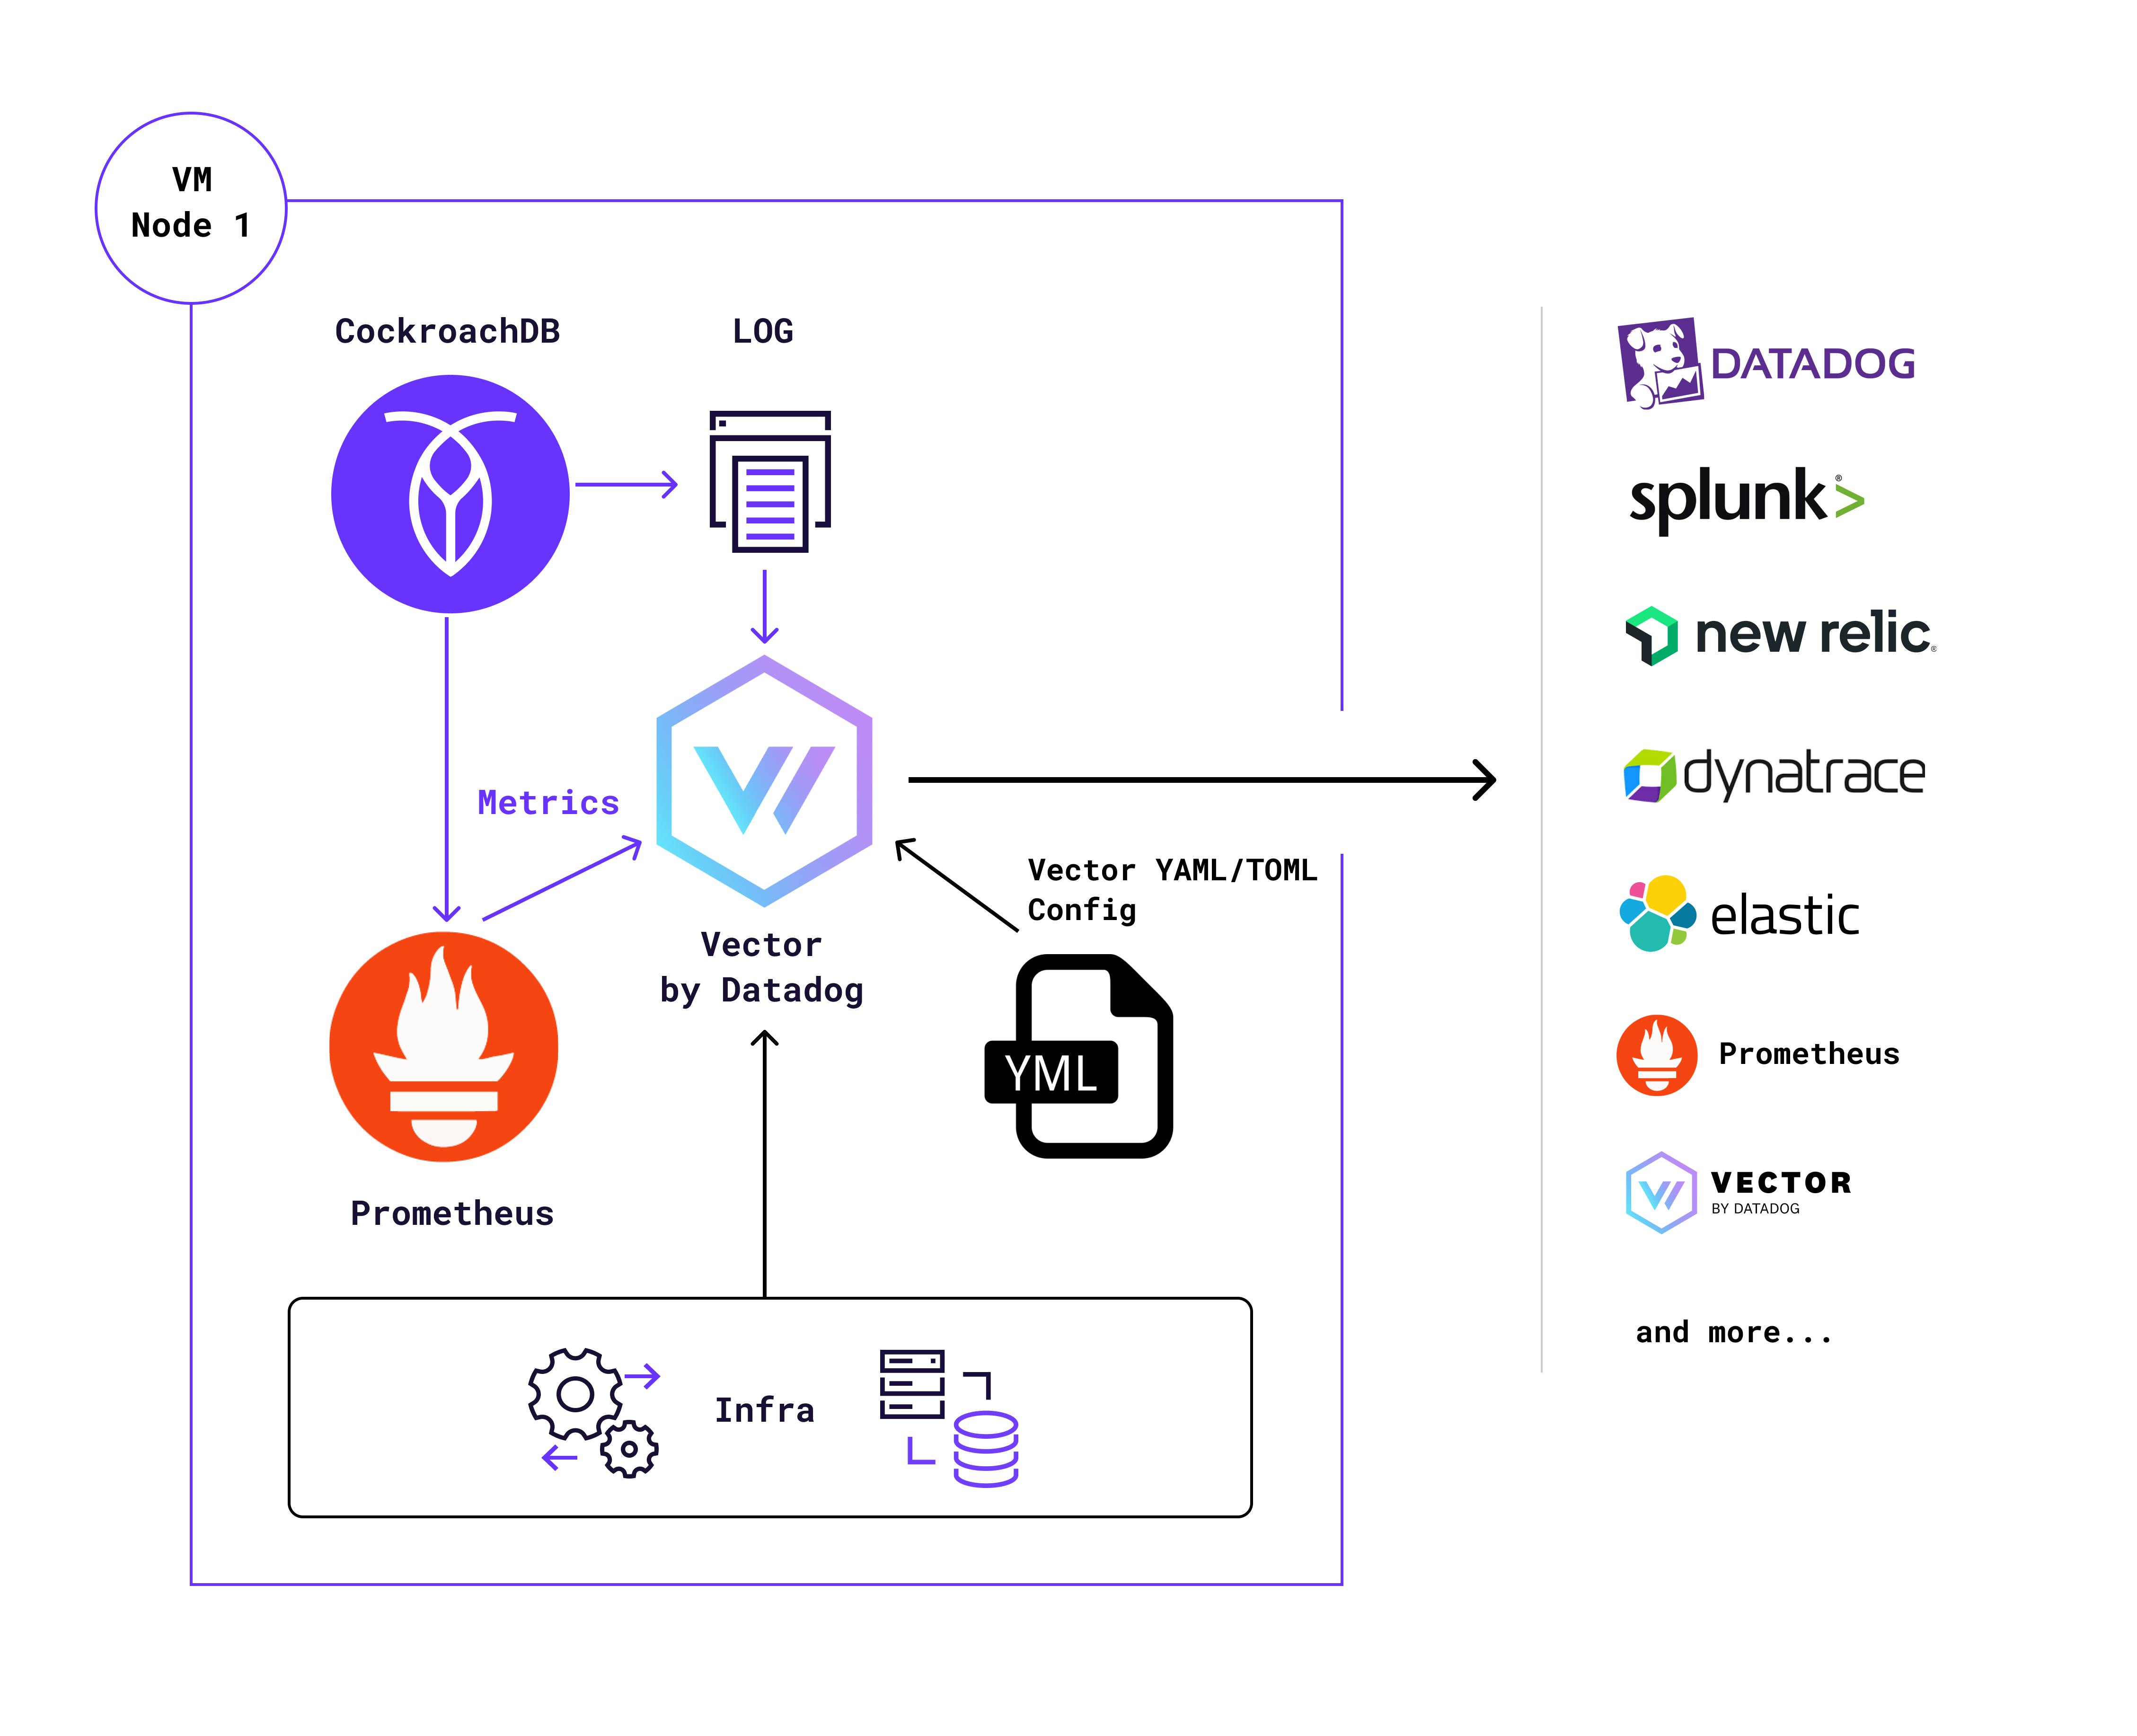 Collection &amp; delivery process with Vector by Datadog from a CockroachDB node